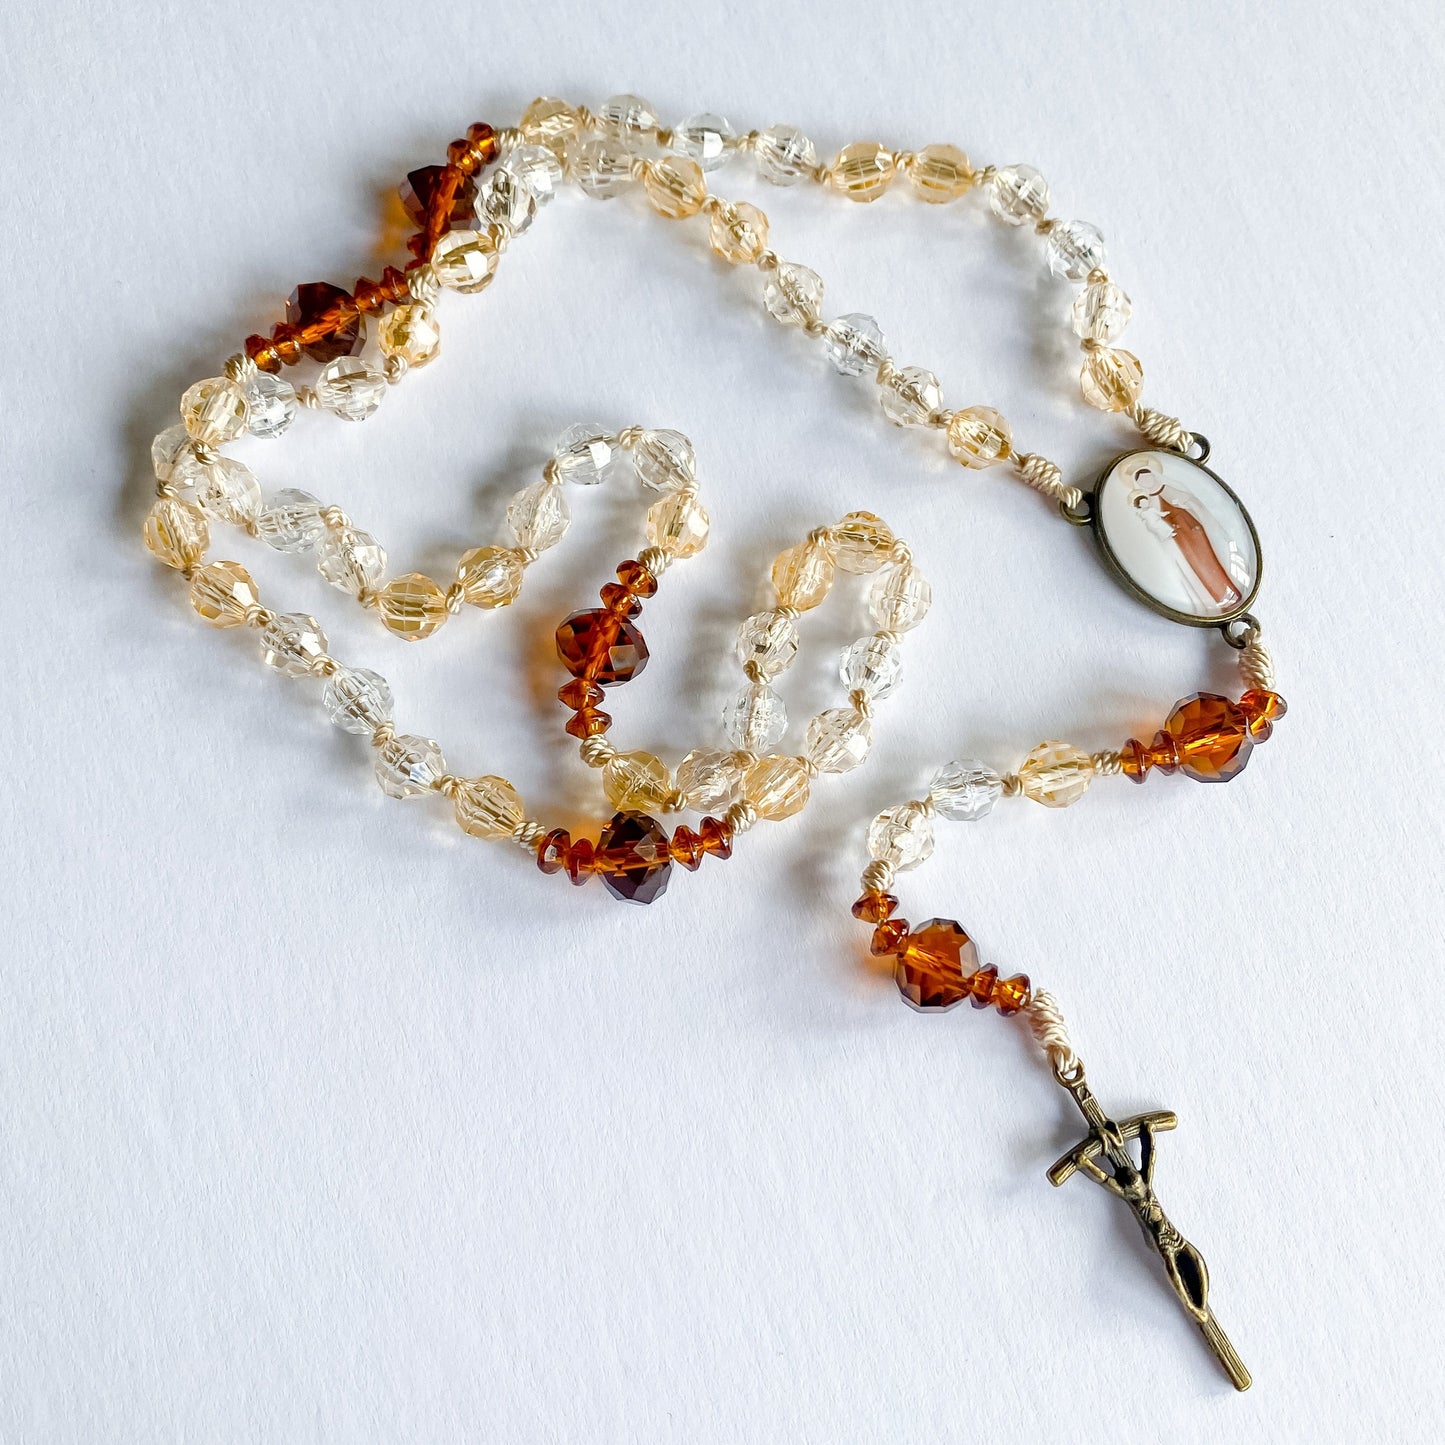 Rosary and Gift Set - Our Lady of Mt. Carmel